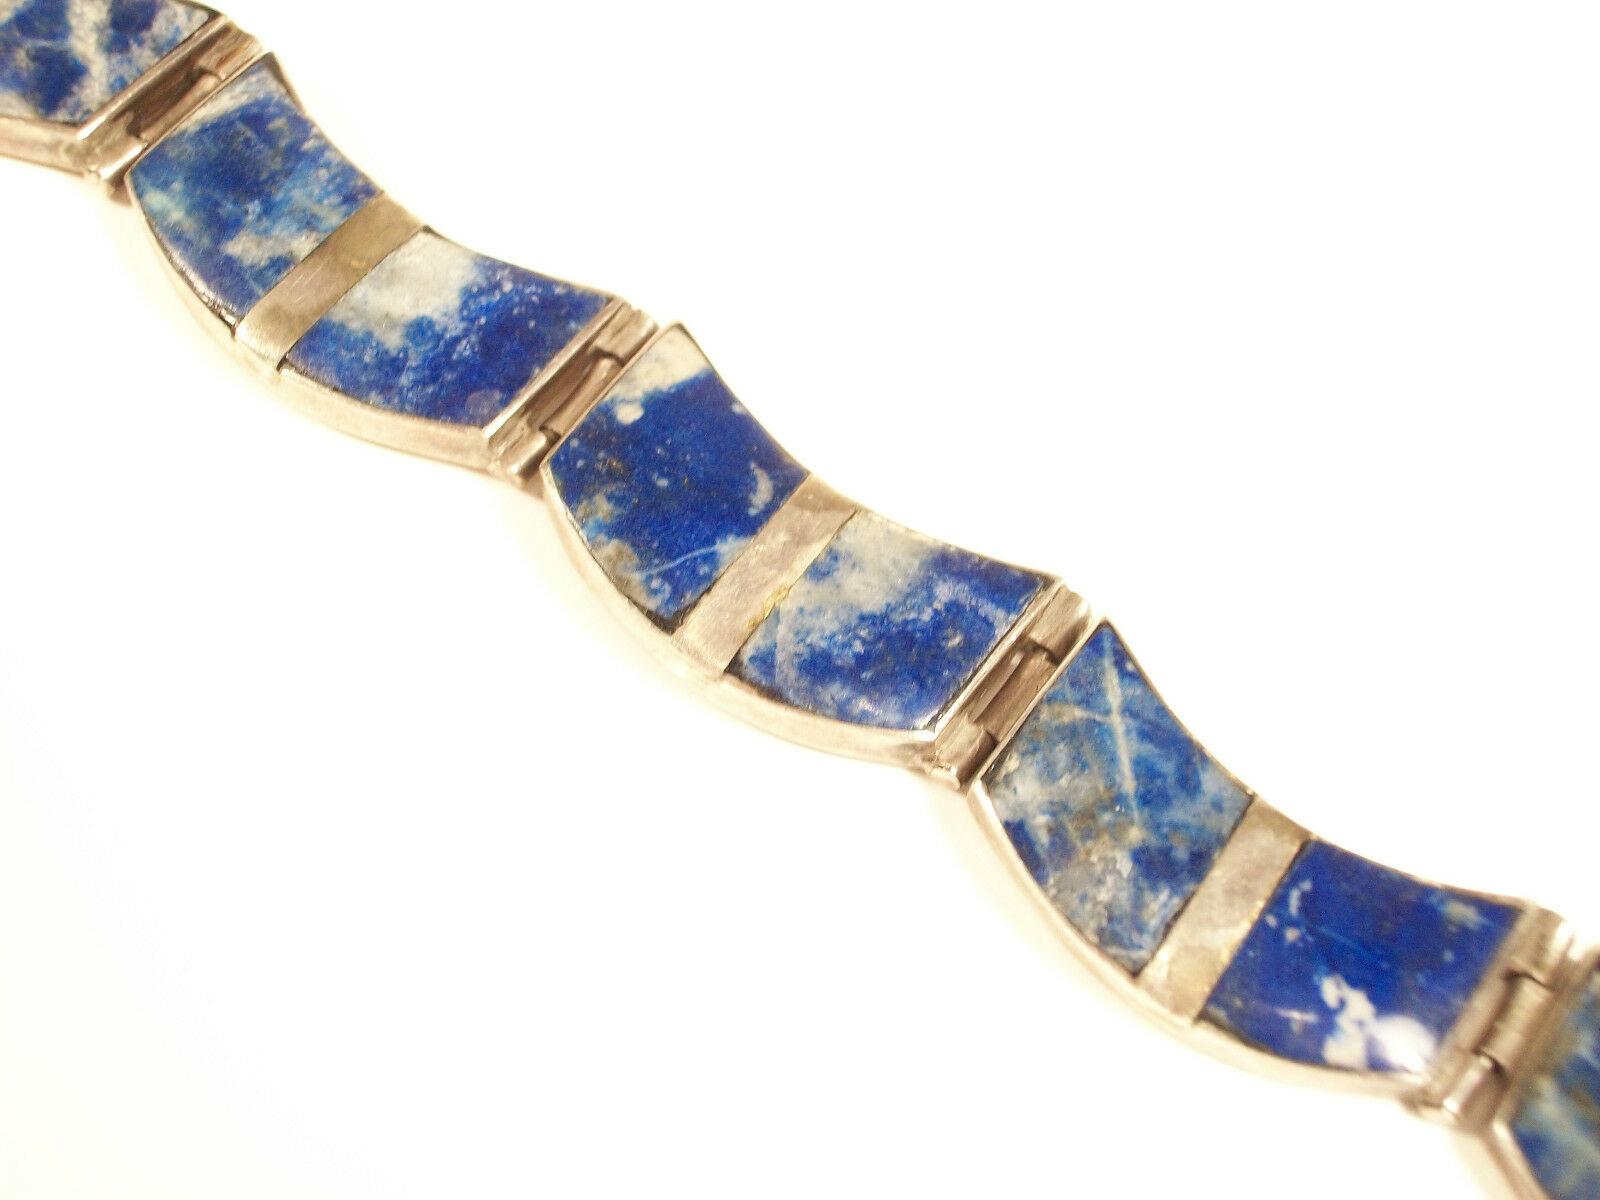 Vintage Lapis Lazuli & Silver Bracelet, 980 Silver, Mexico, Mid-20th Century In Good Condition For Sale In Chatham, CA